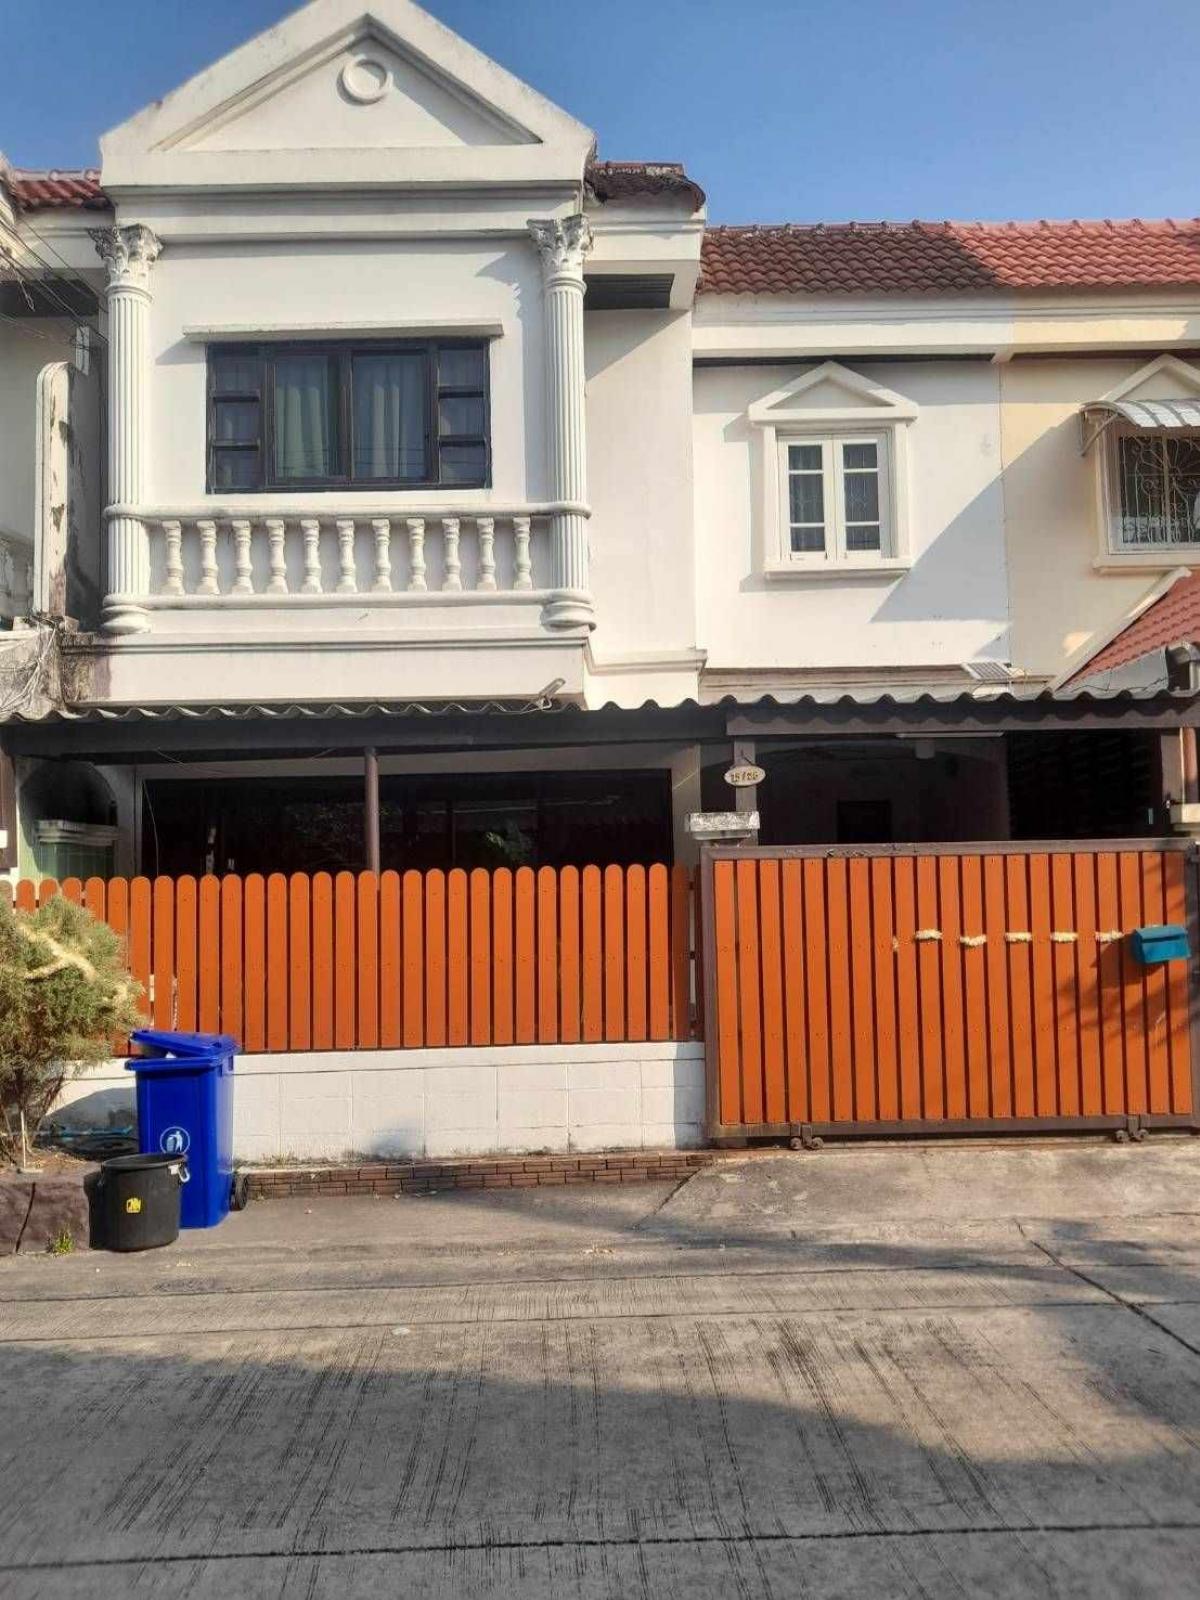 For RentTownhouseYothinpattana,CDC : 2-story townhouse for rent, near the expressway, Soi Nuanchan 40.